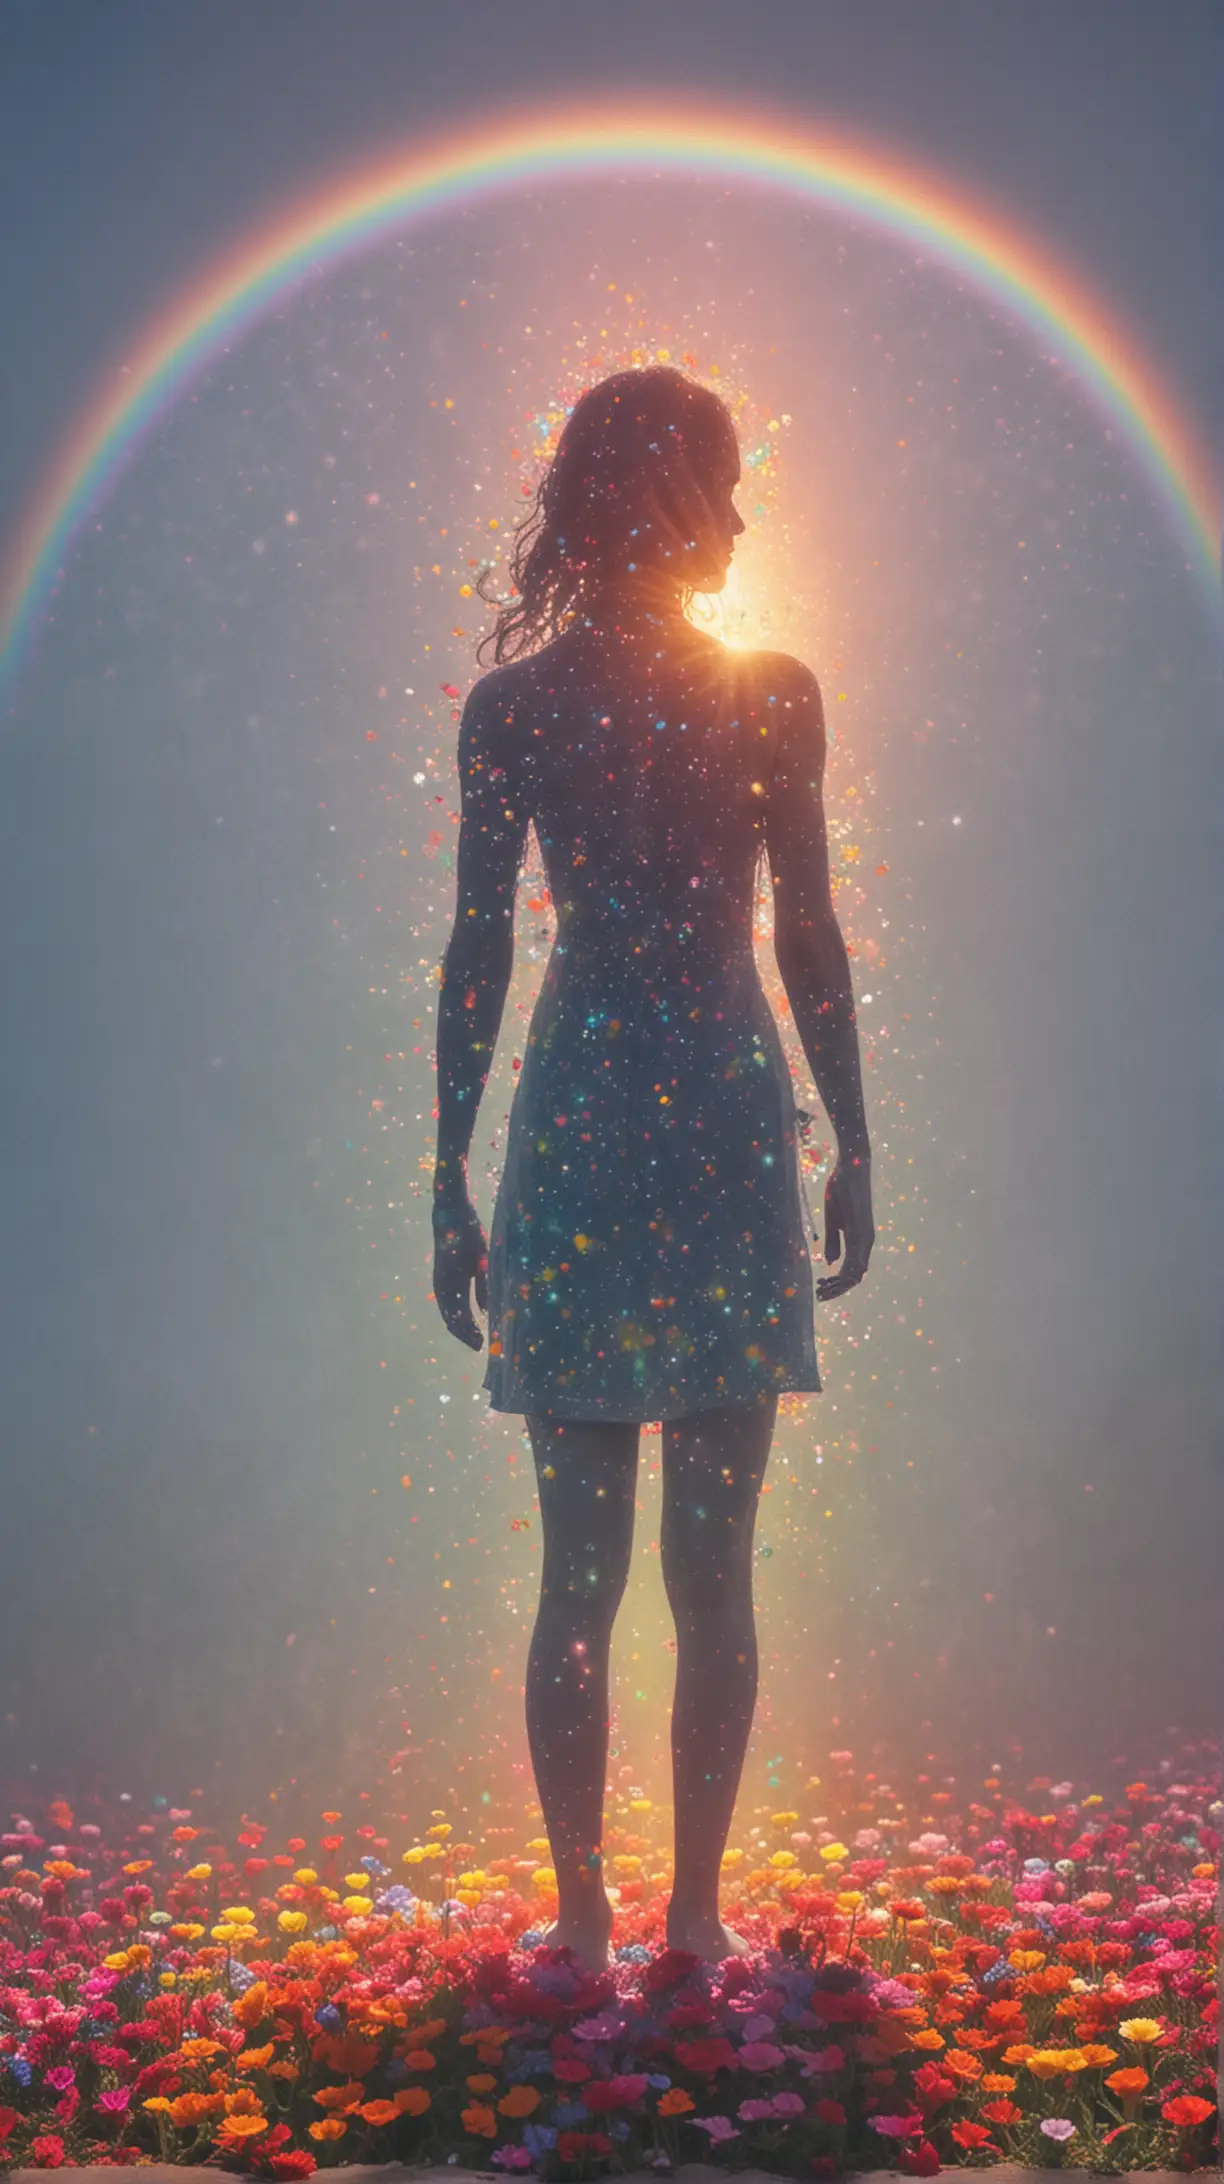 the outline of a person created by rainbow flowers, surrounded by a rainbow colorful aura
